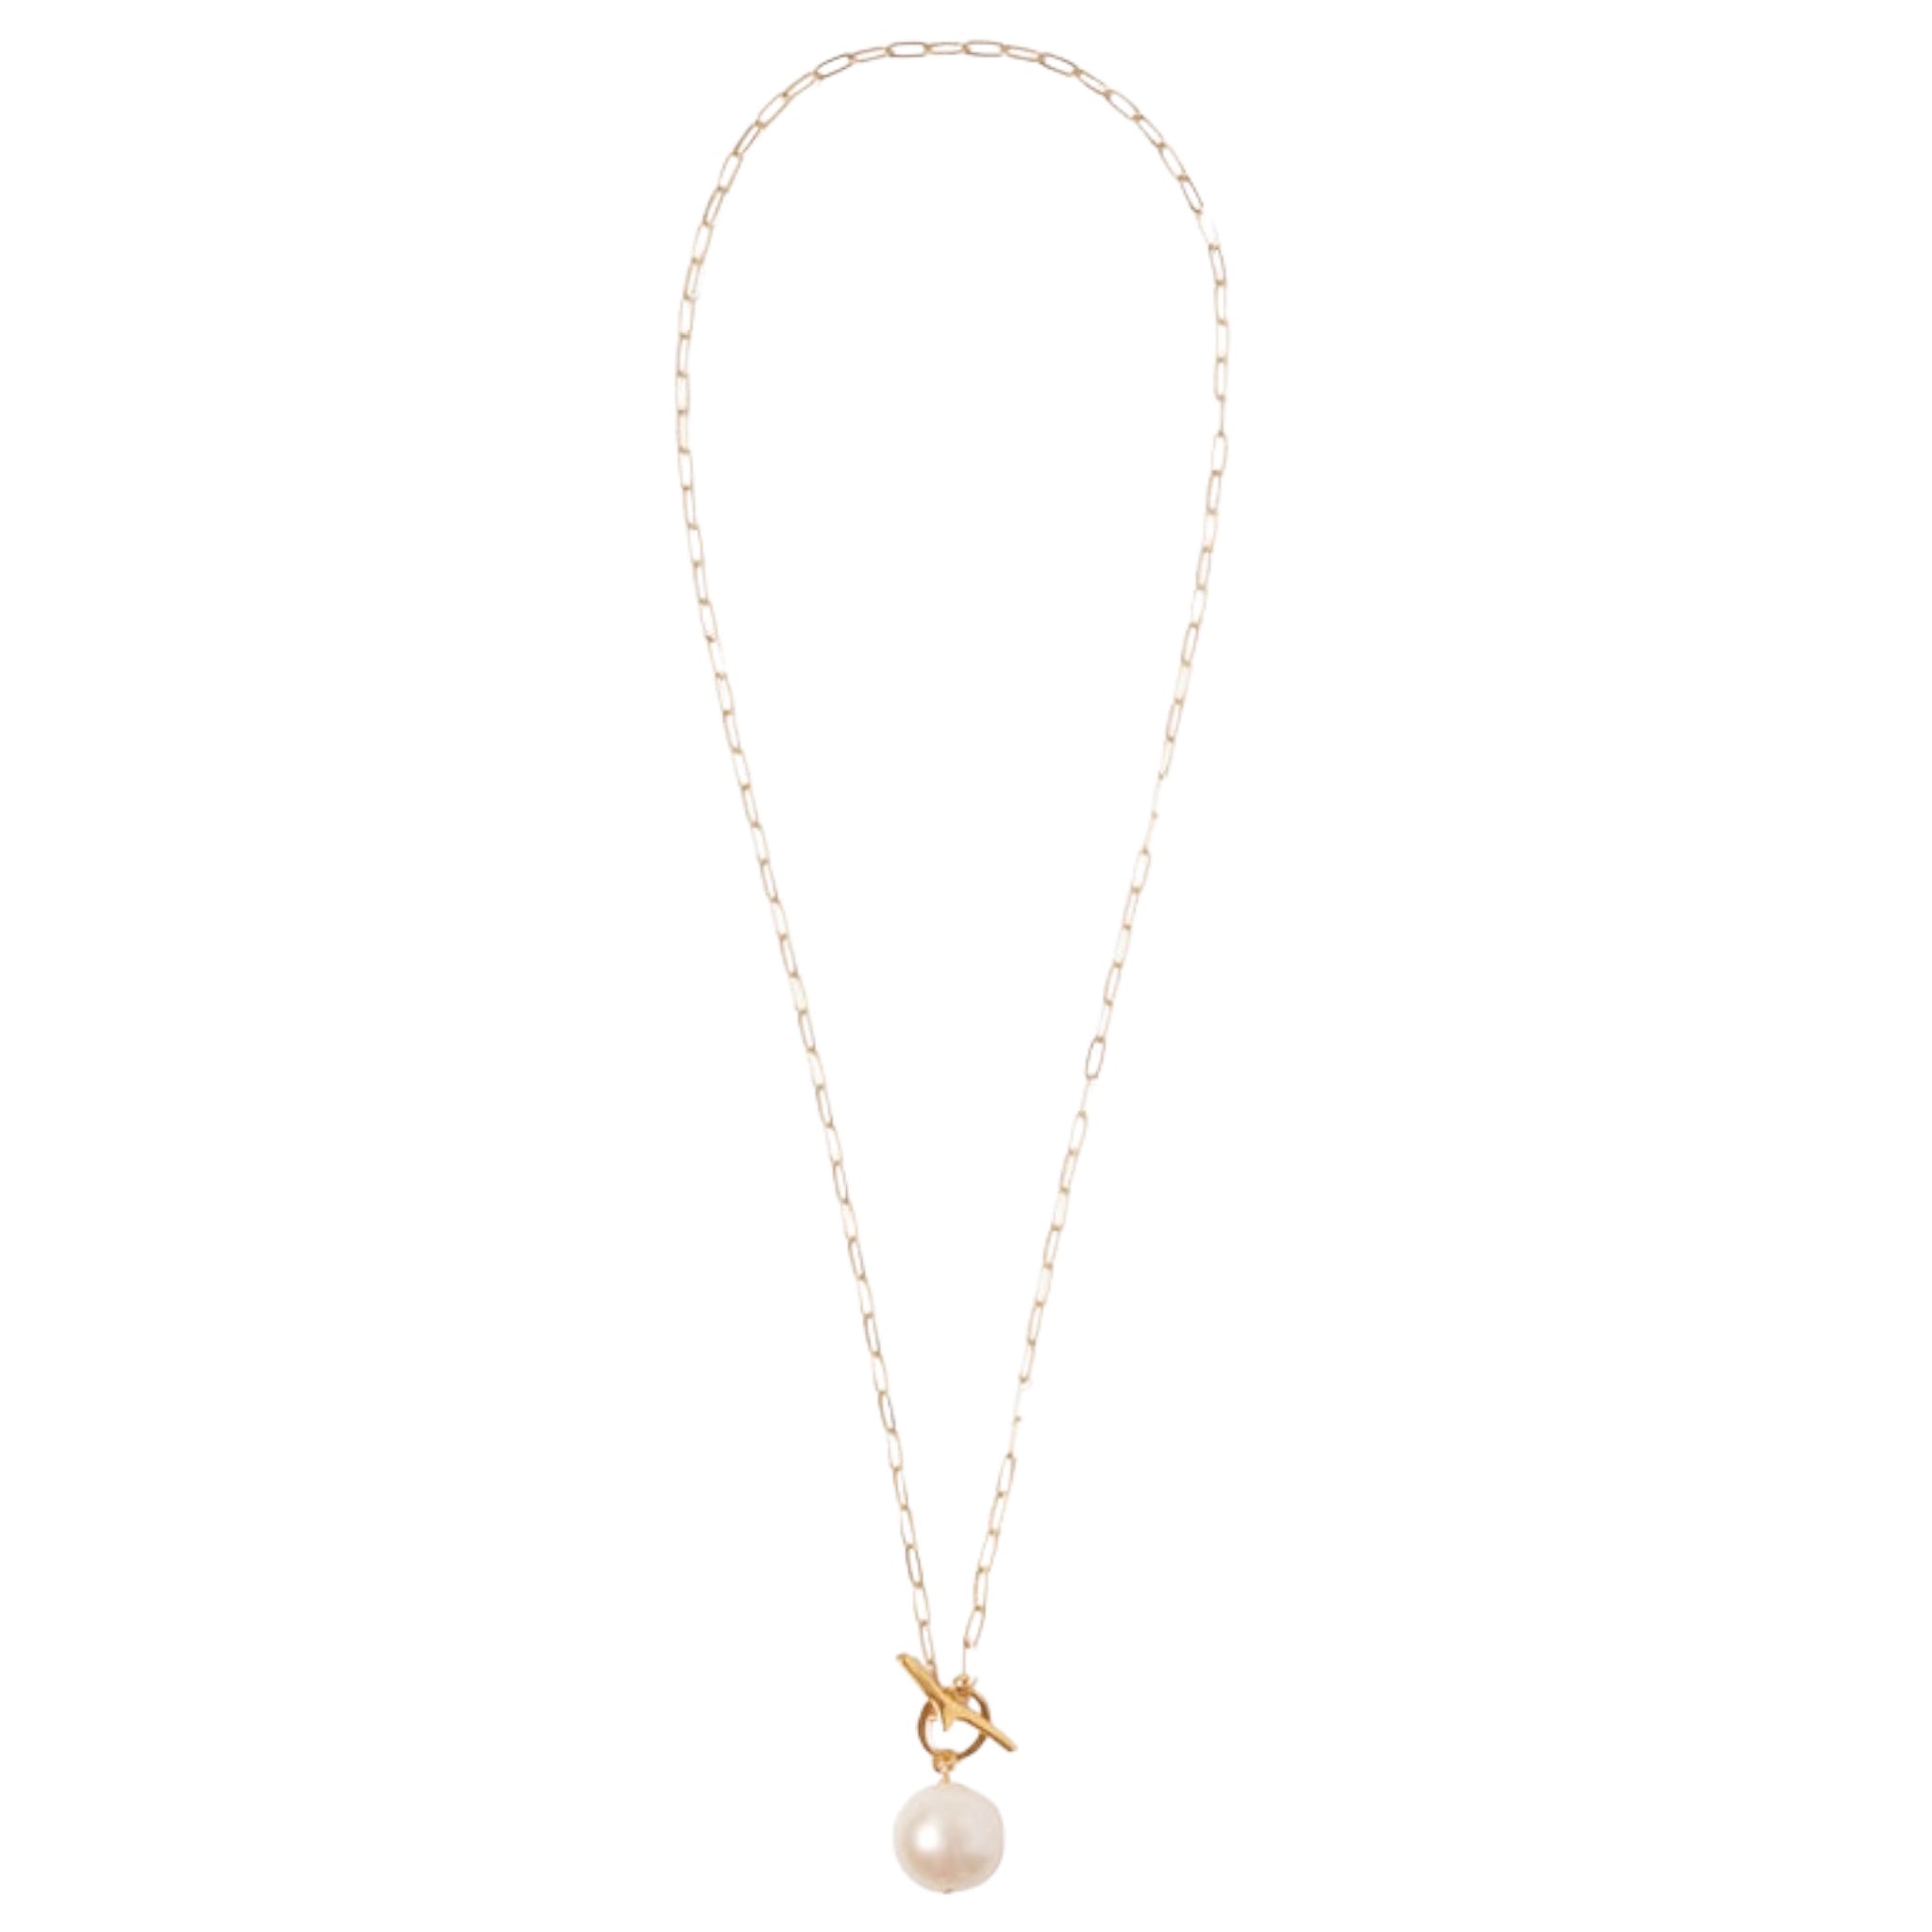 Chan Luu White Freshwater Pearl Toggle Closure Pendant Necklace in 18k Gold Vermeil